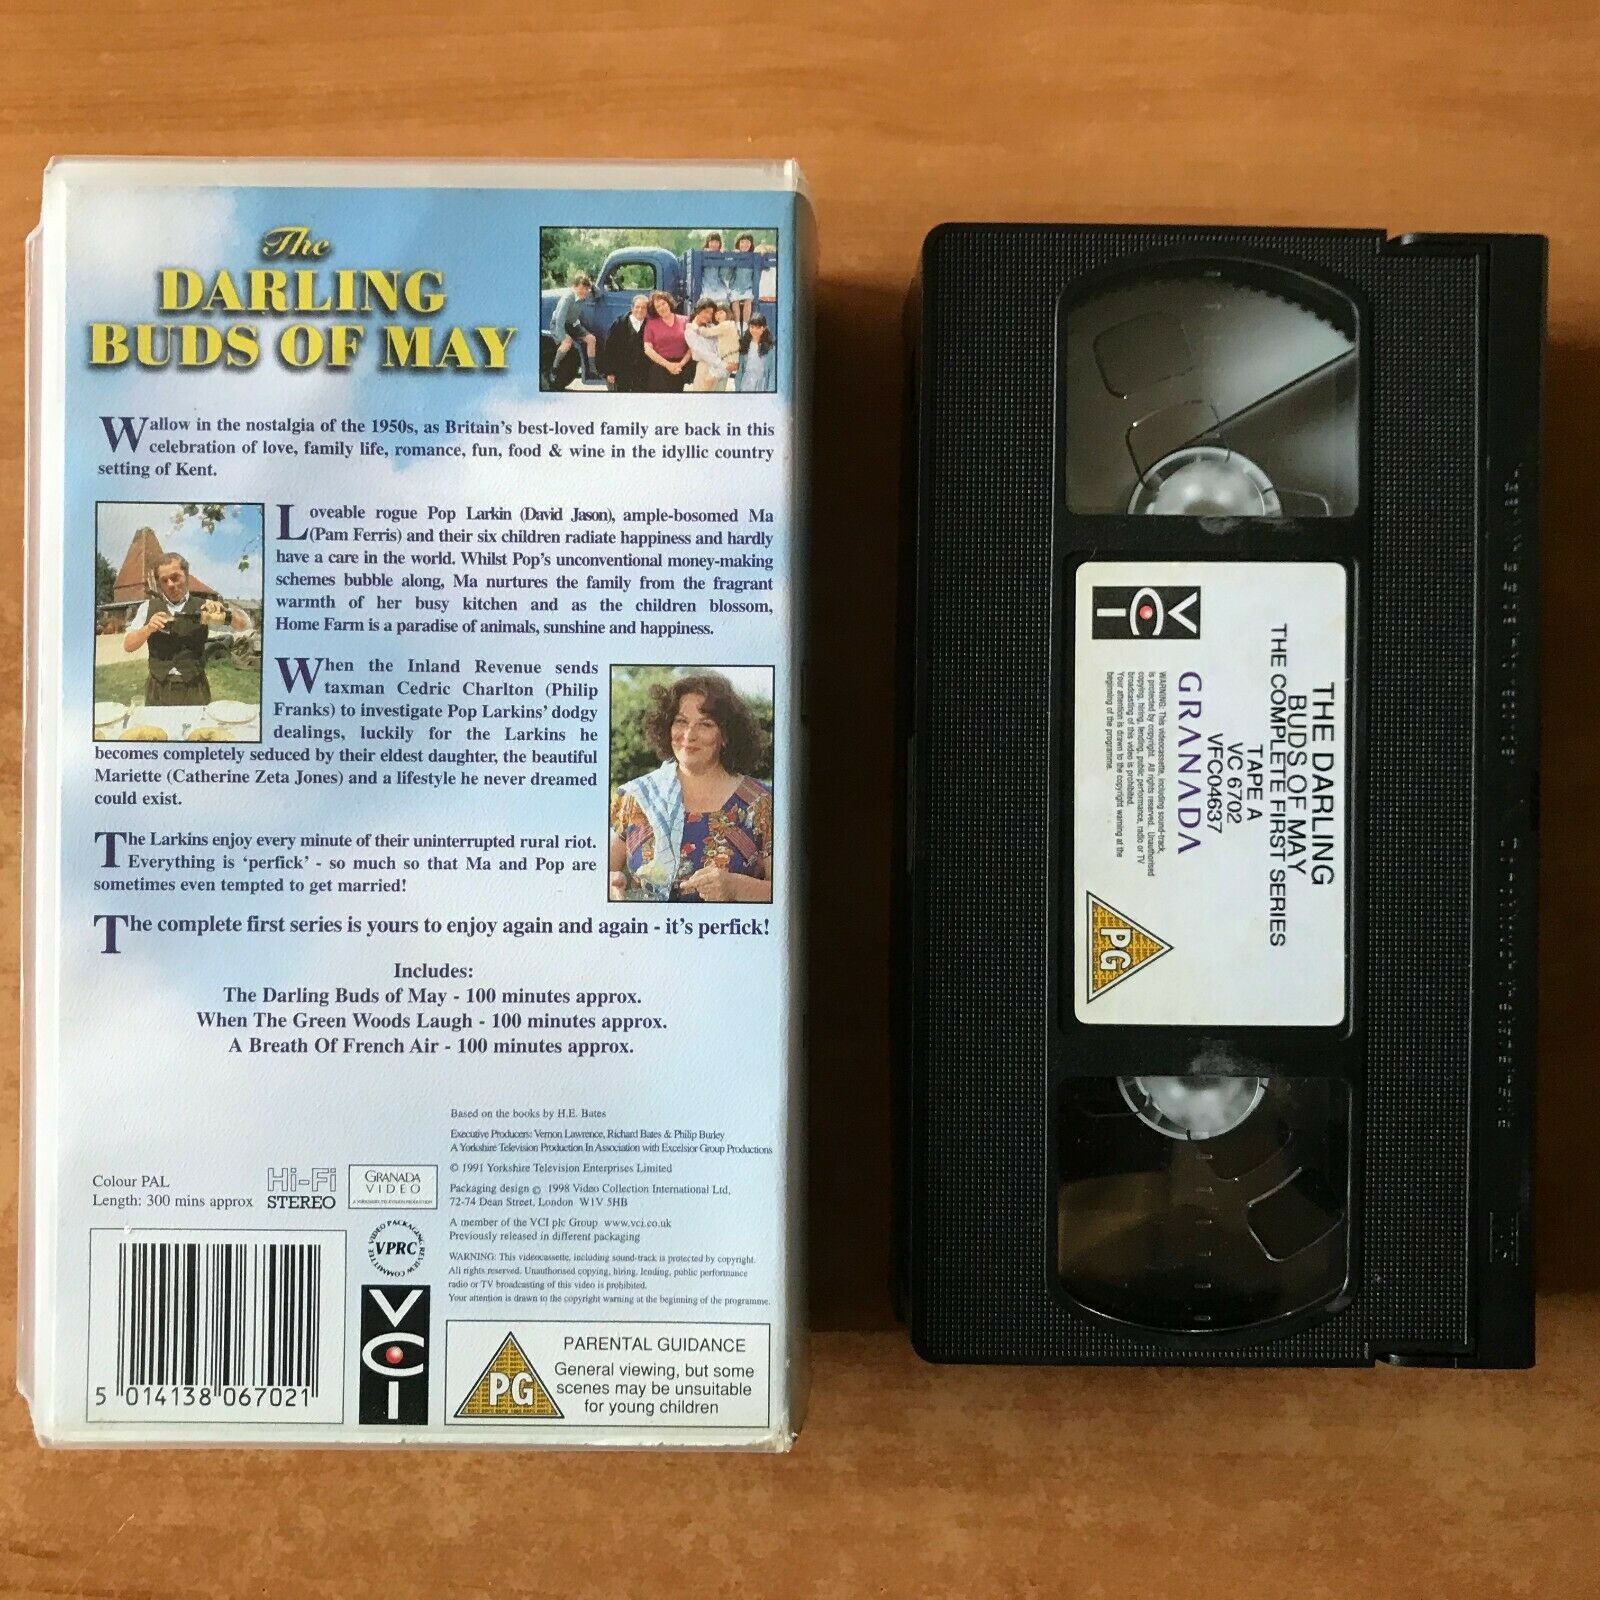 The Darling Buds Of May (Complete 1st Series): Romance - David Jason - Pal VHS-